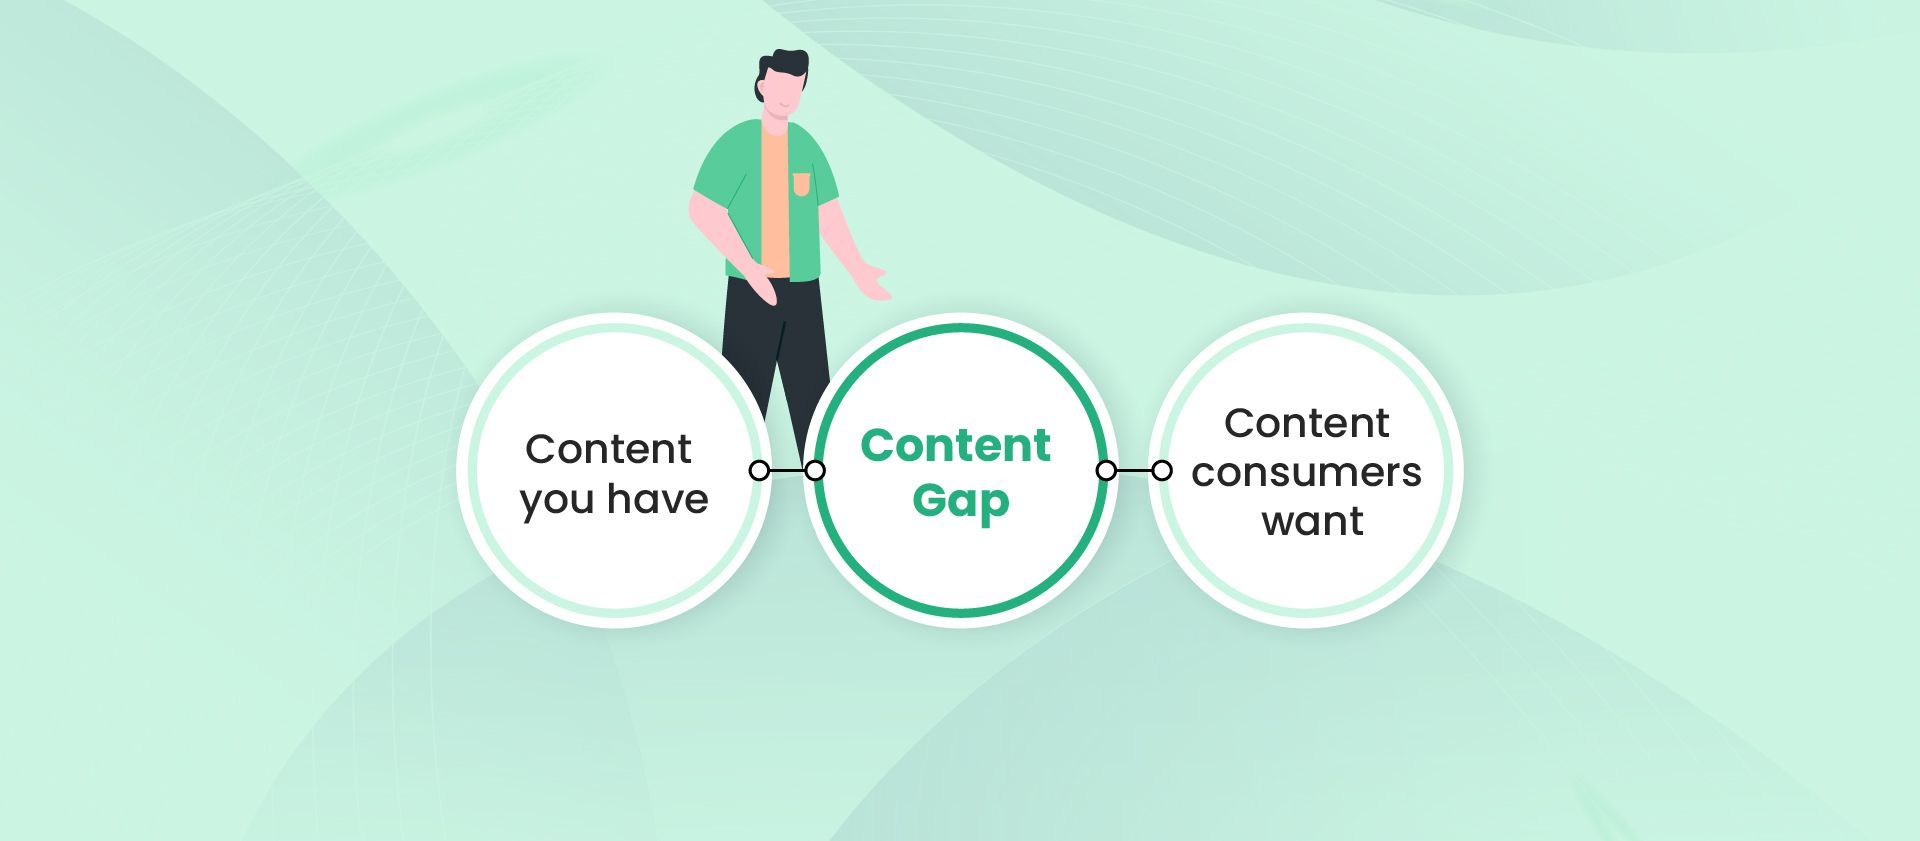 What is a content gap?